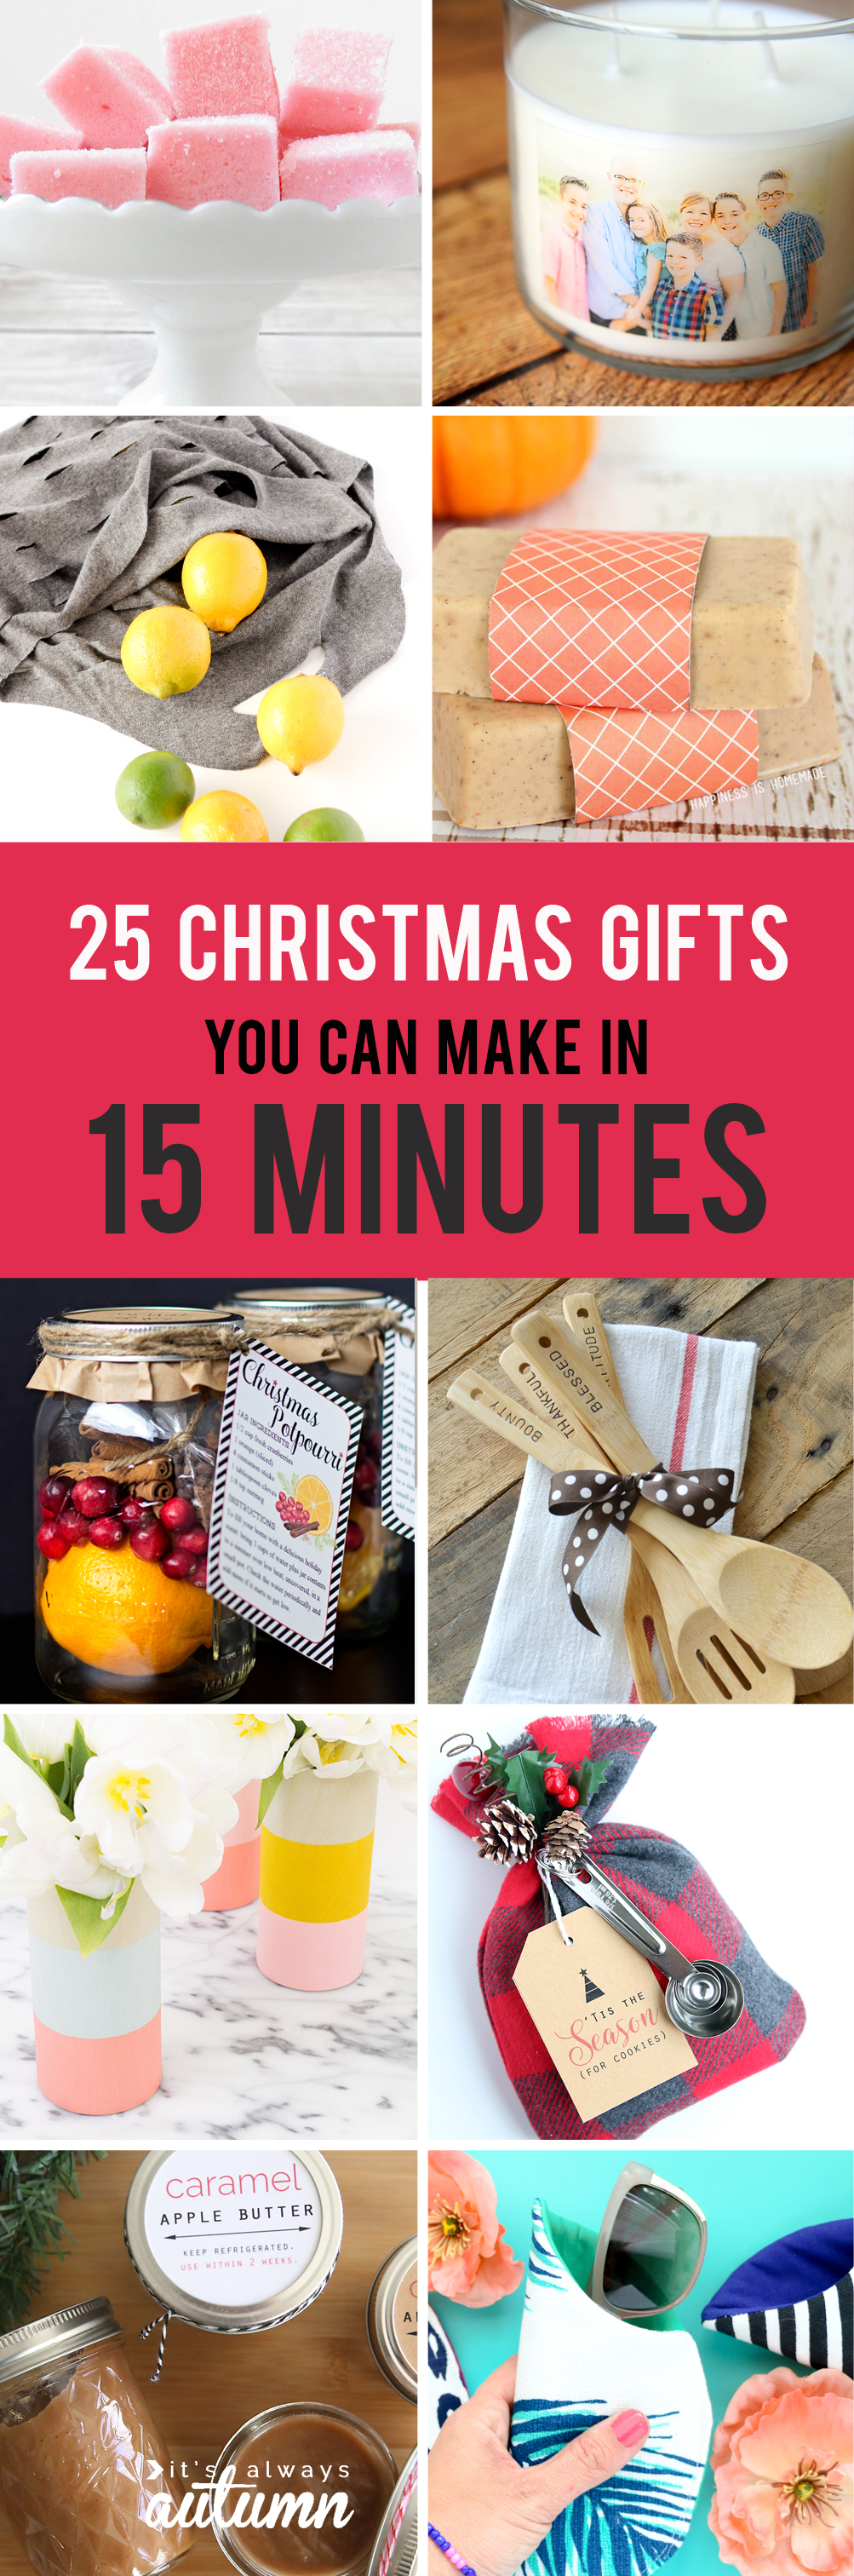 25 easy homemade  Christmas gifts you can make in 15 